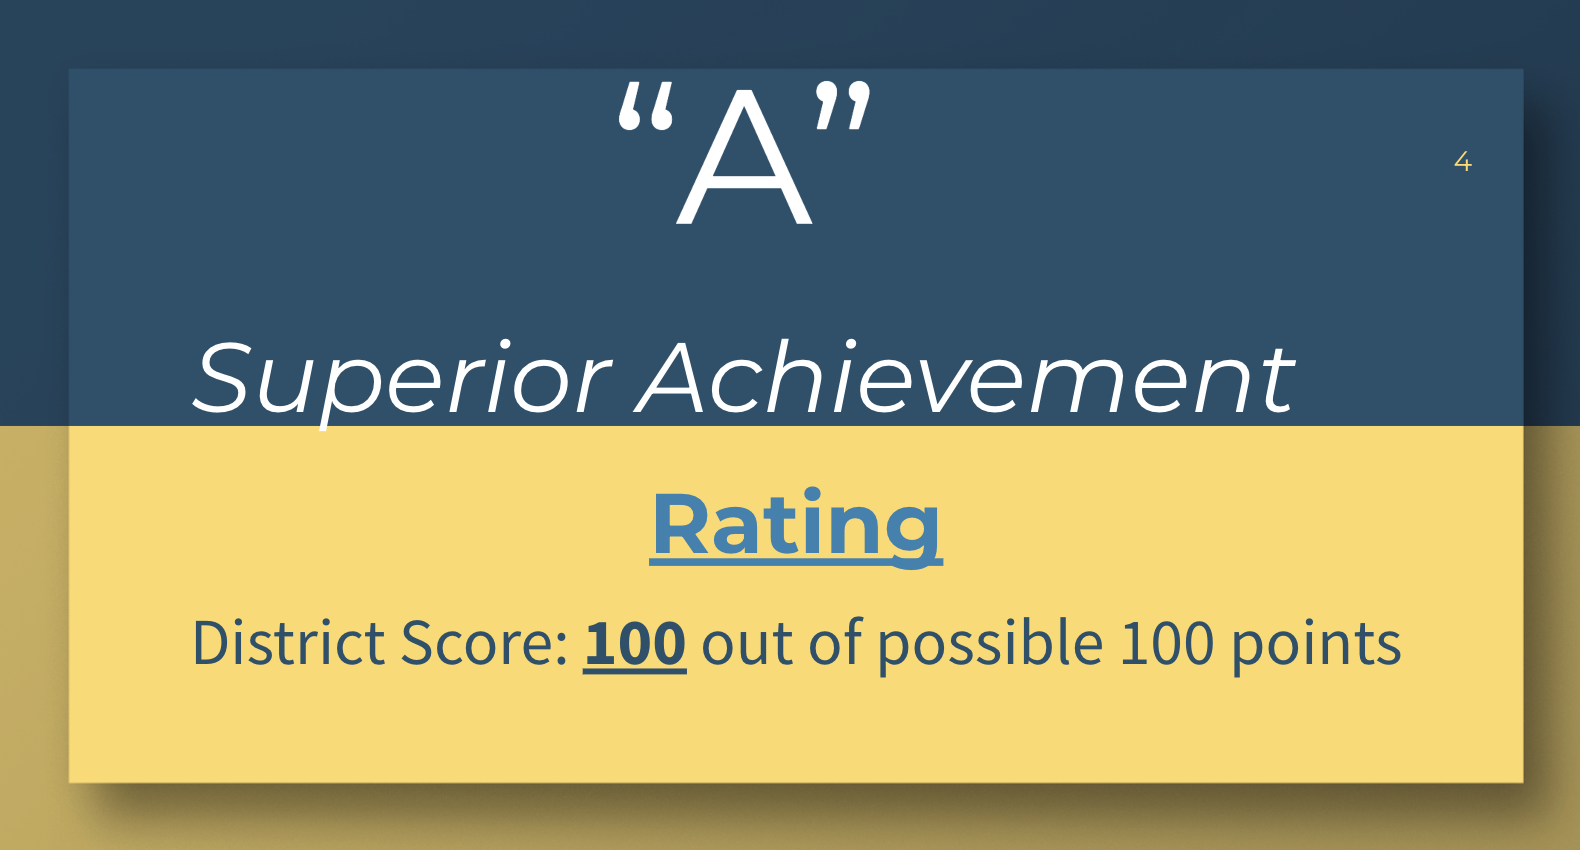 "A" Rating Image